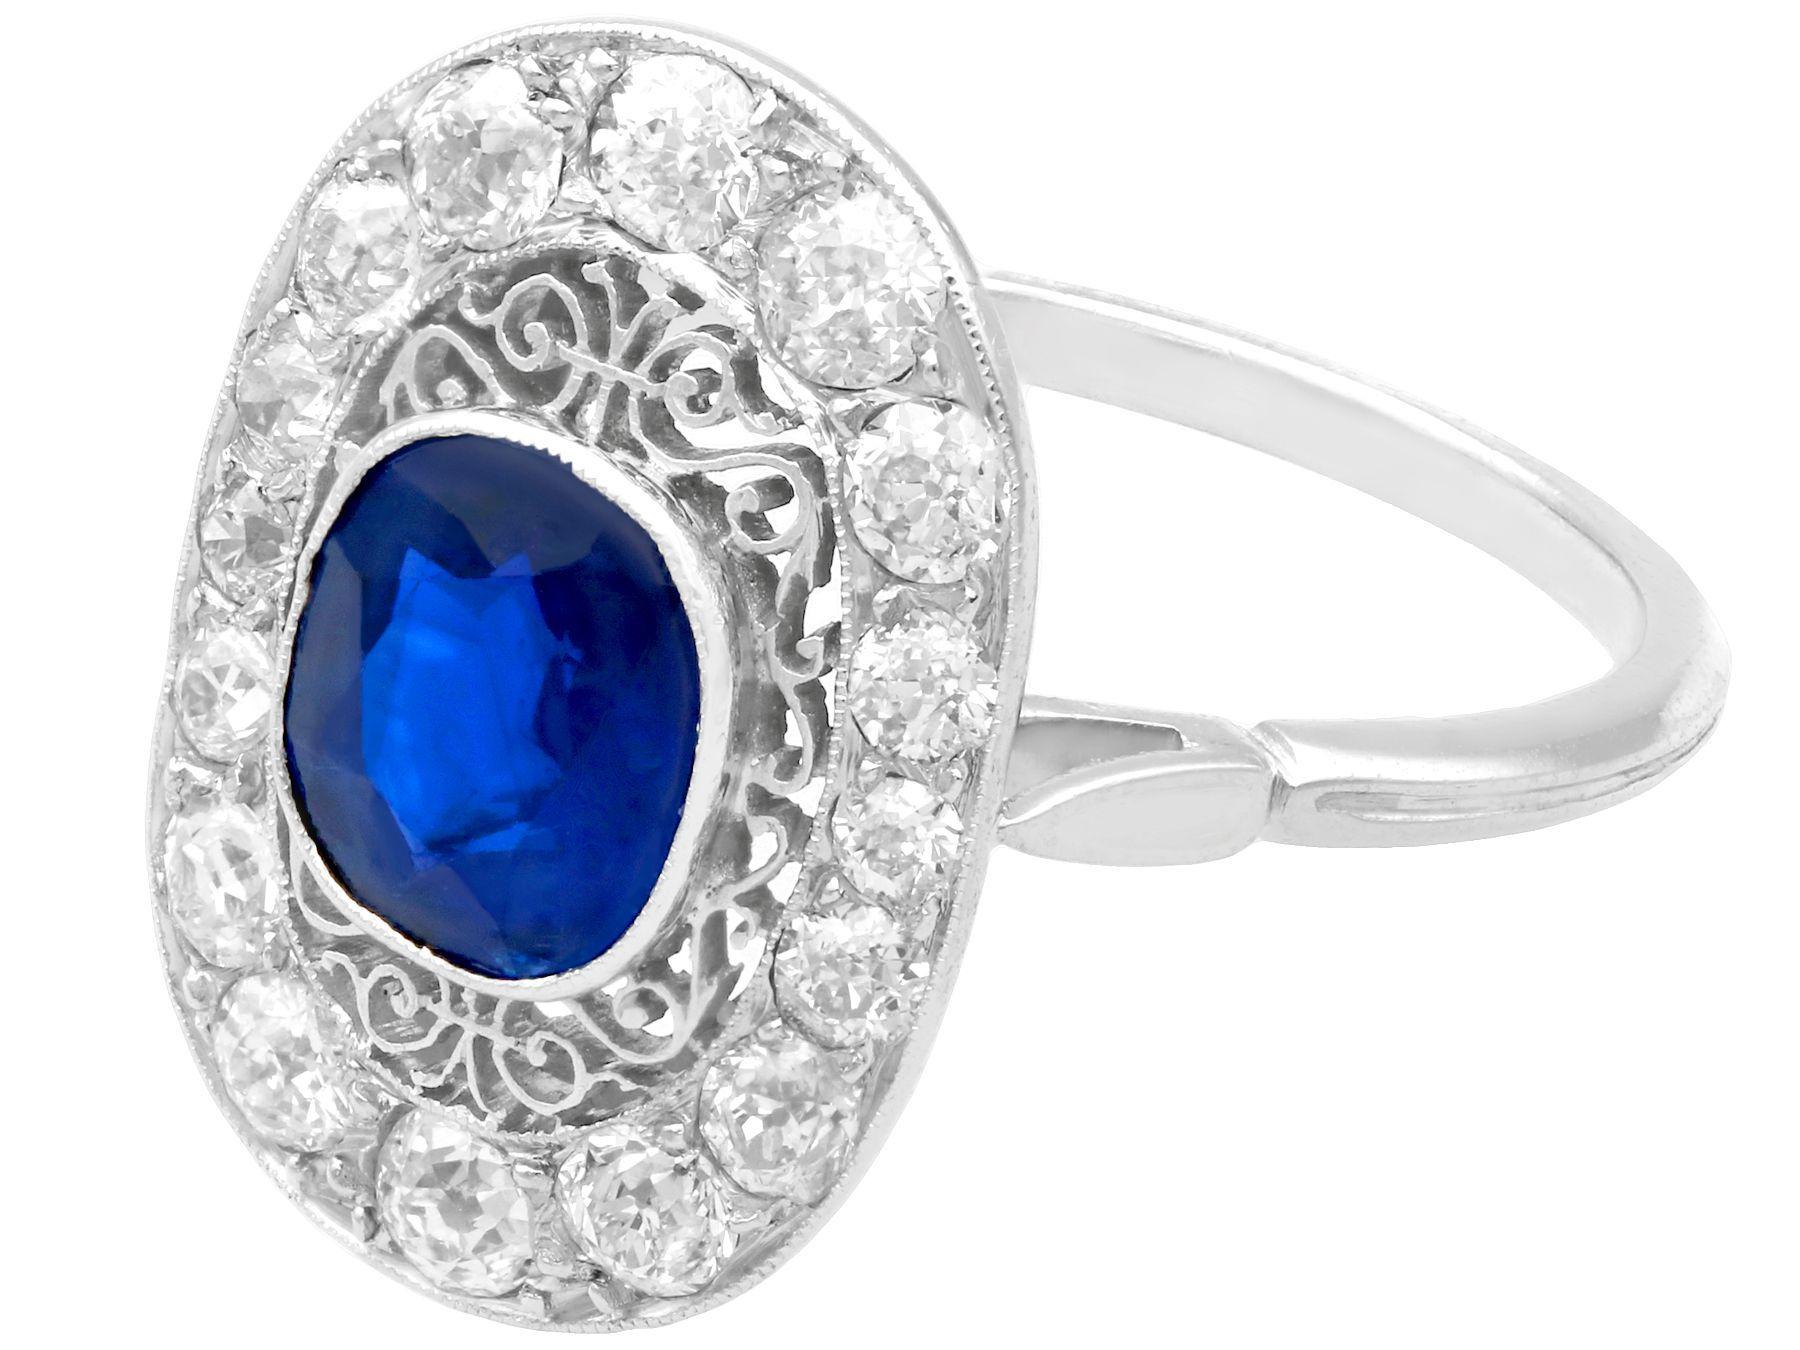 1940s 1.43 Carat Sapphire and Diamond Platinum Cocktail Ring In Excellent Condition For Sale In Jesmond, Newcastle Upon Tyne